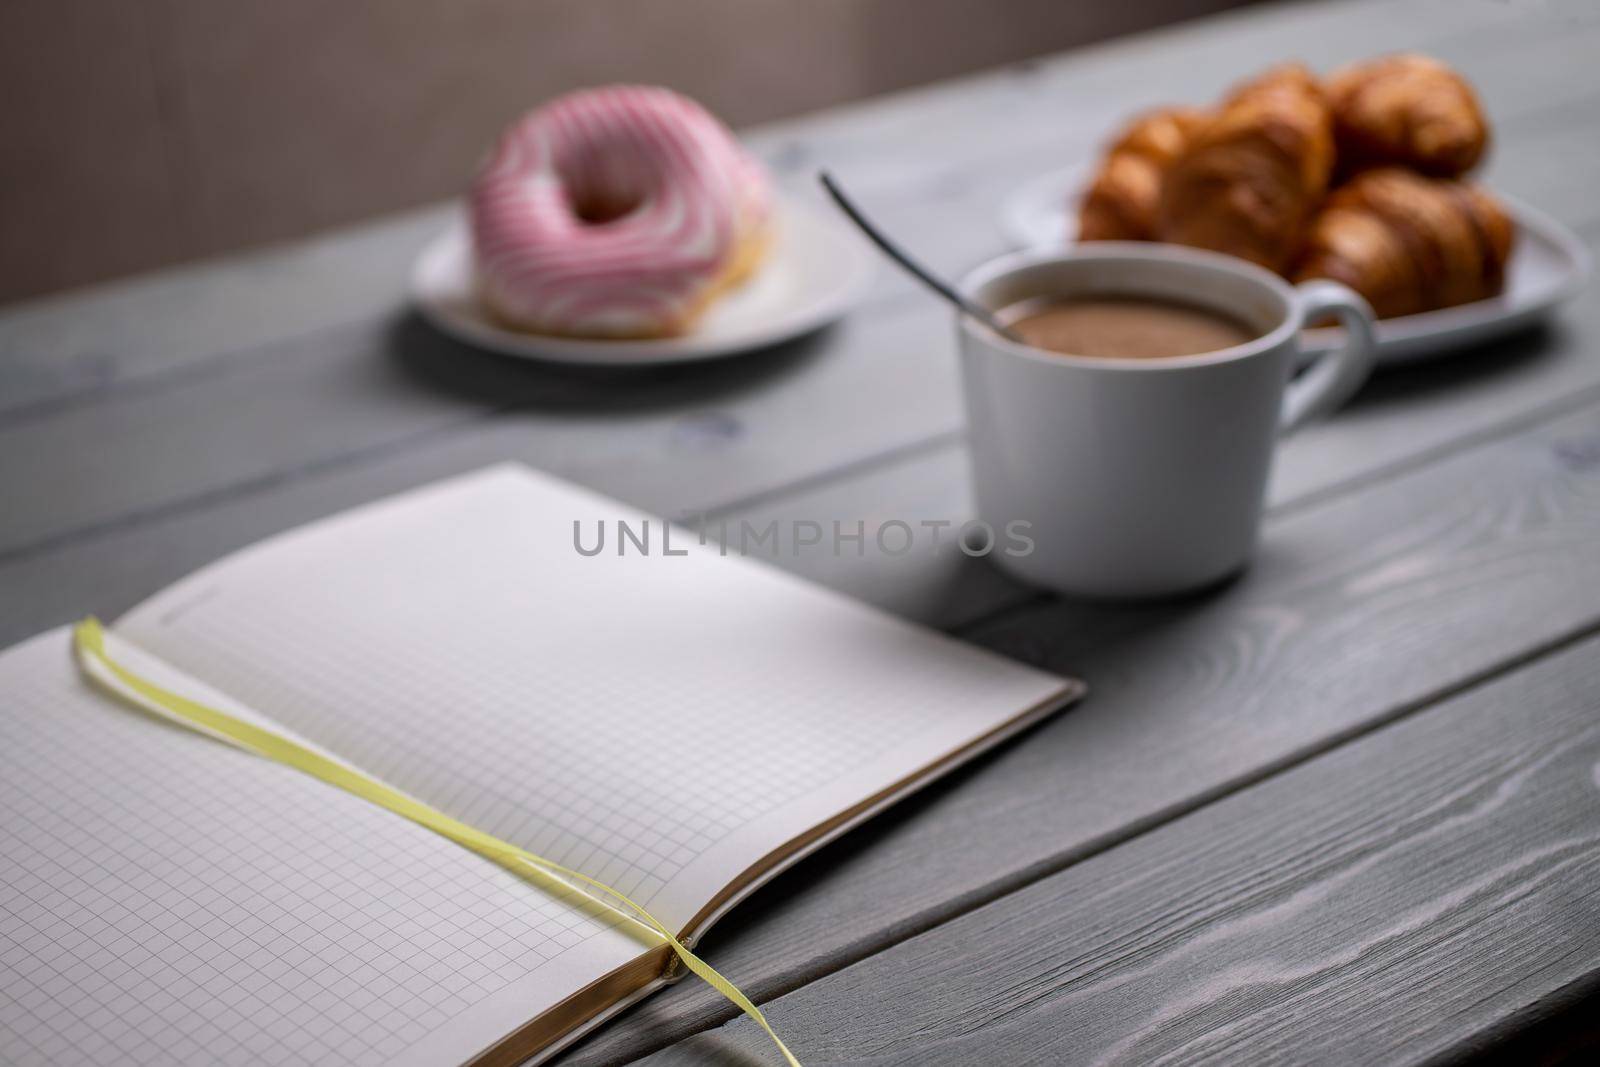 Coffee with milk, croissants and a notebook. Selective focus. The concept of morning planning